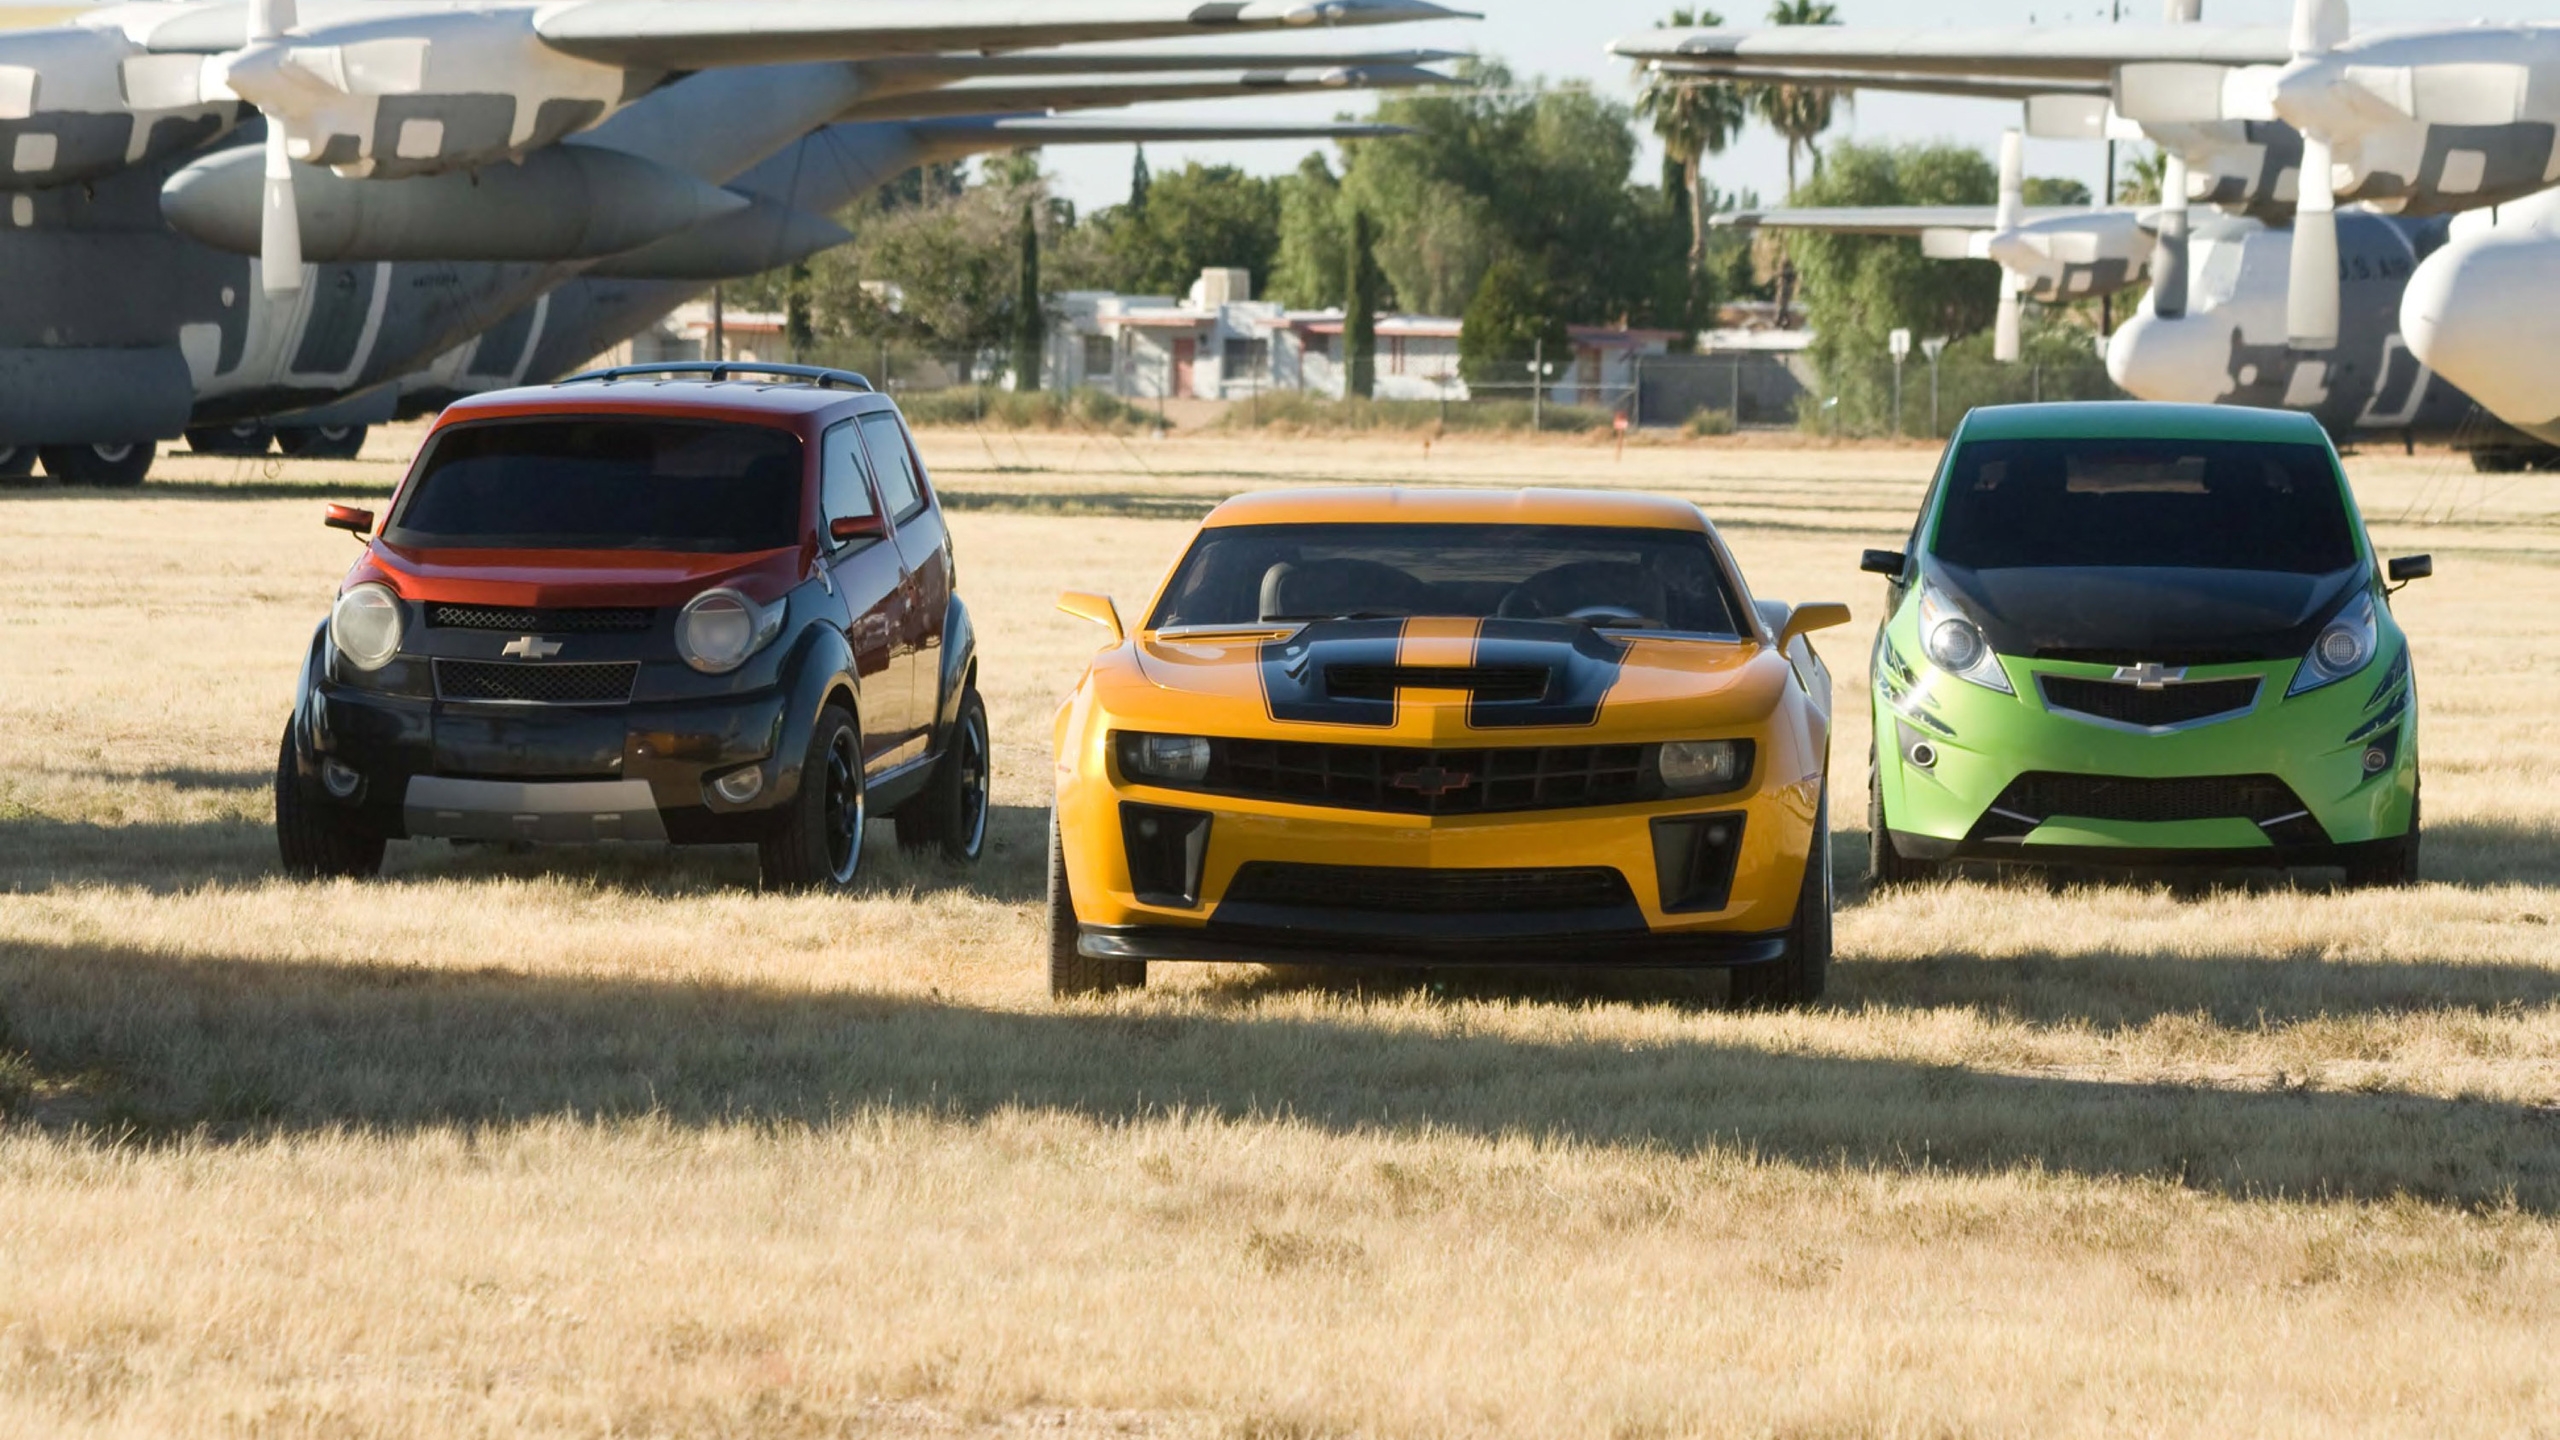 Cars from Transformers for 2560x1440 HDTV resolution